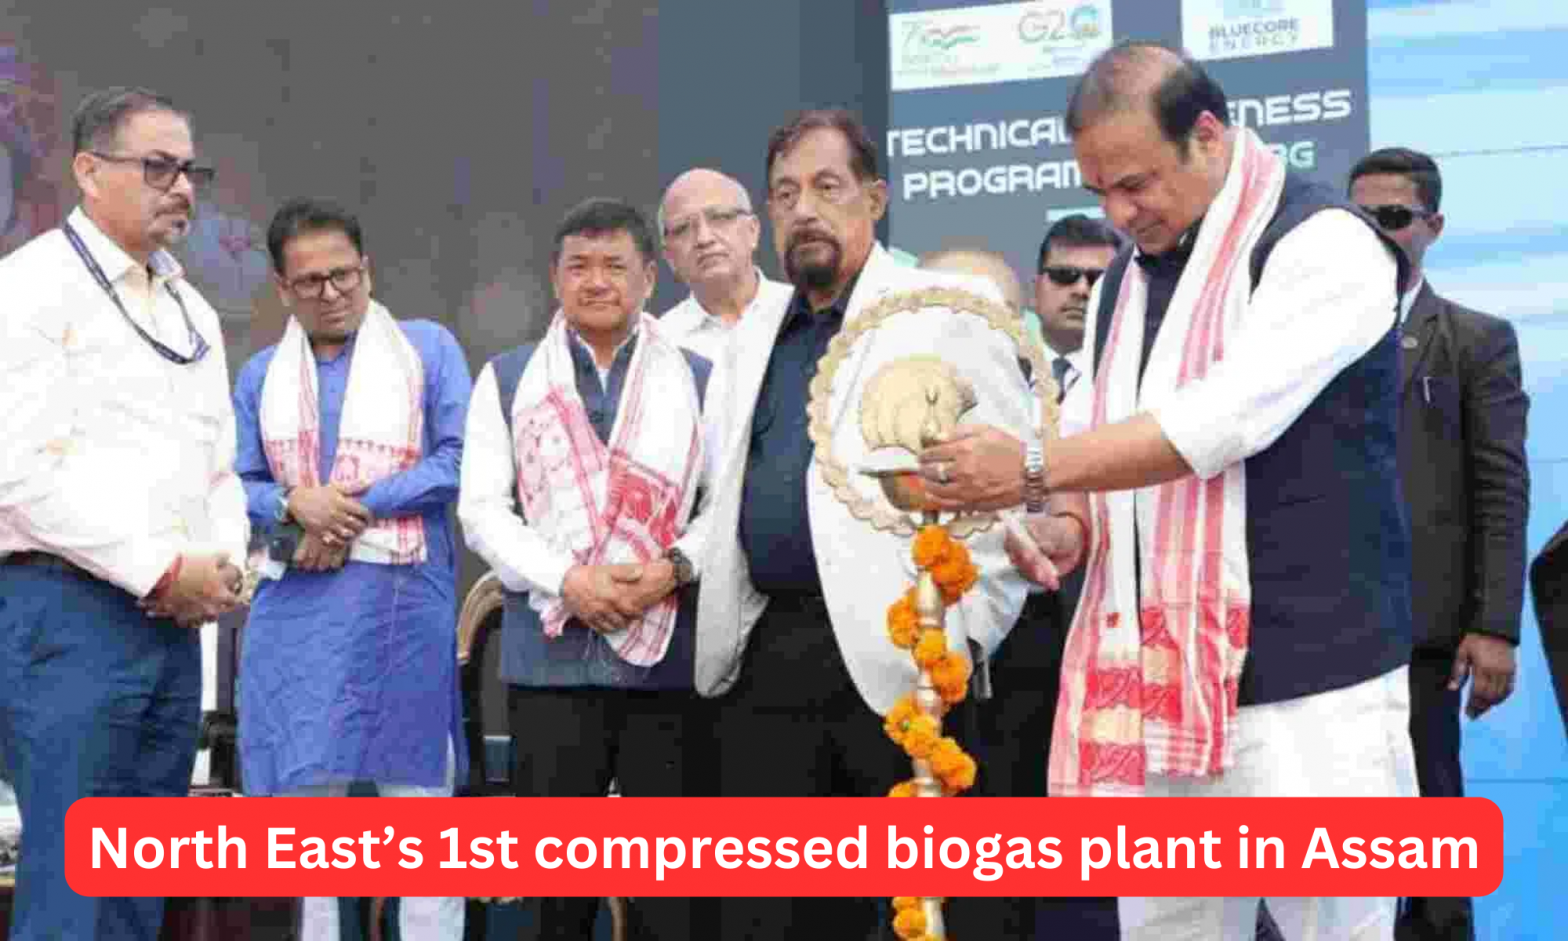 North East’s 1st compressed biogas plant in Assam